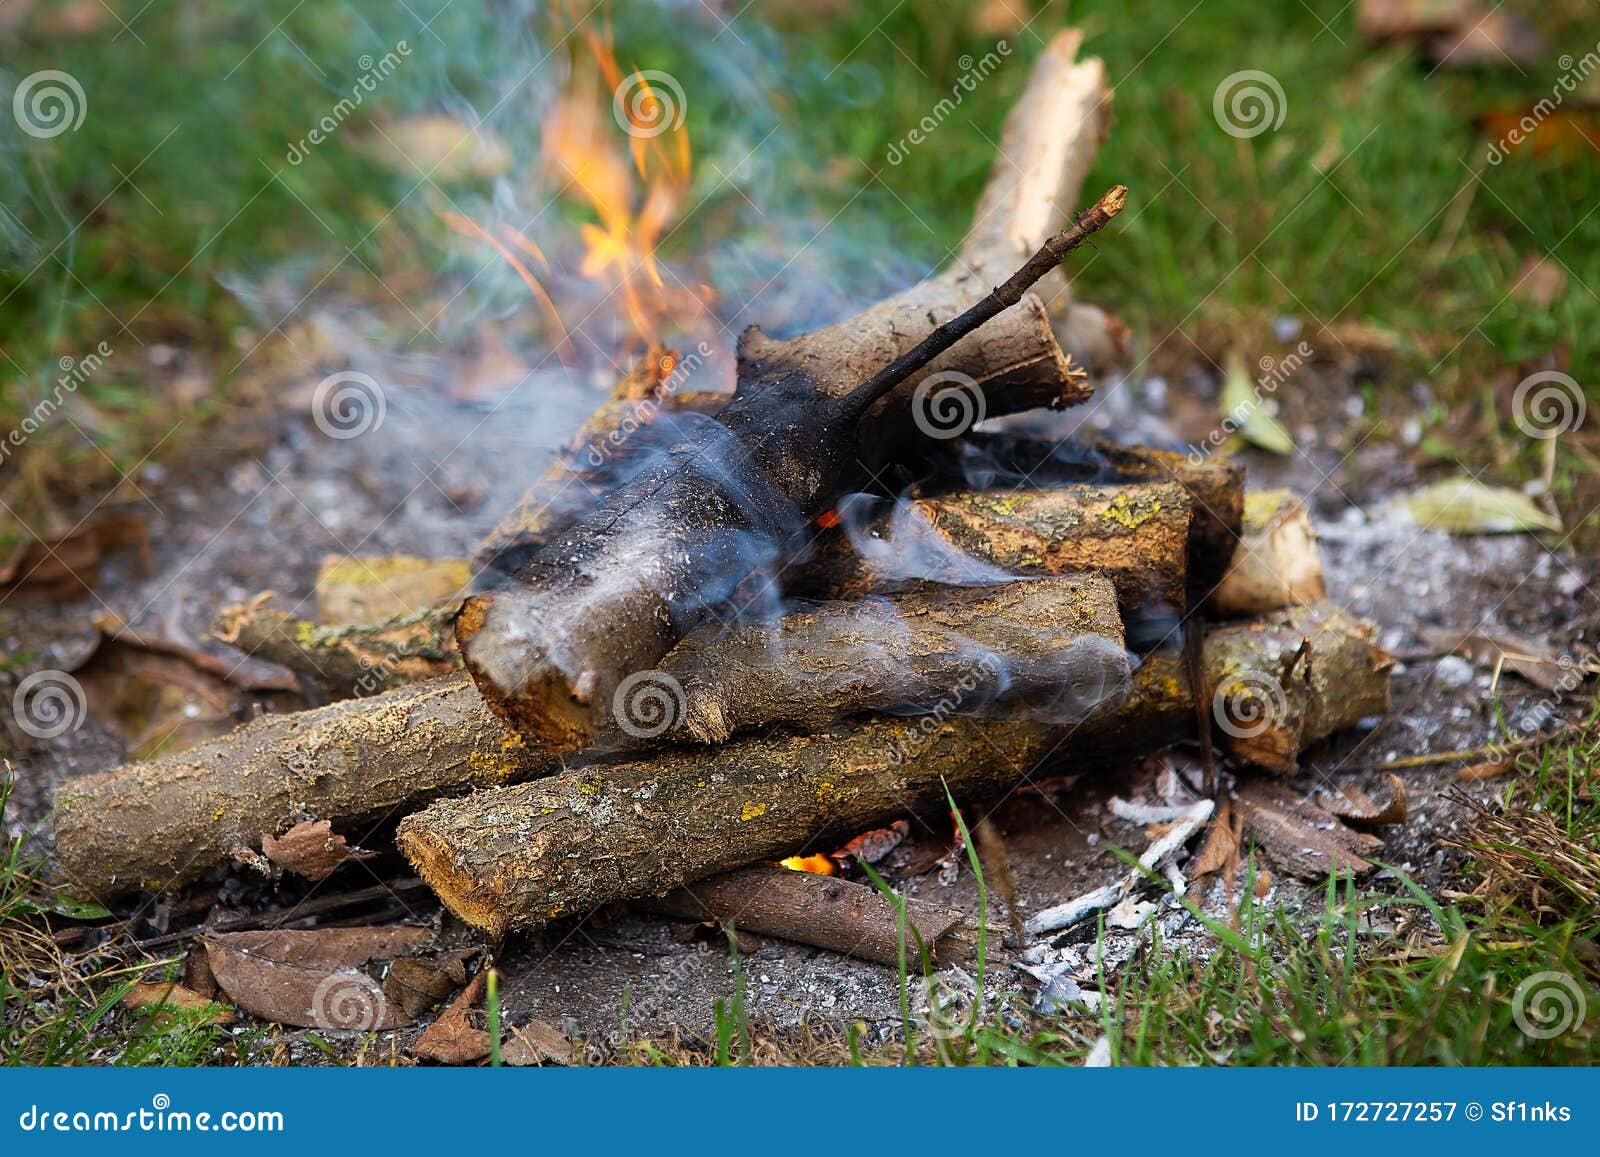 Bonfire, Firewood Close Up. Burning Fire from Stacked Logs Stock Image ...